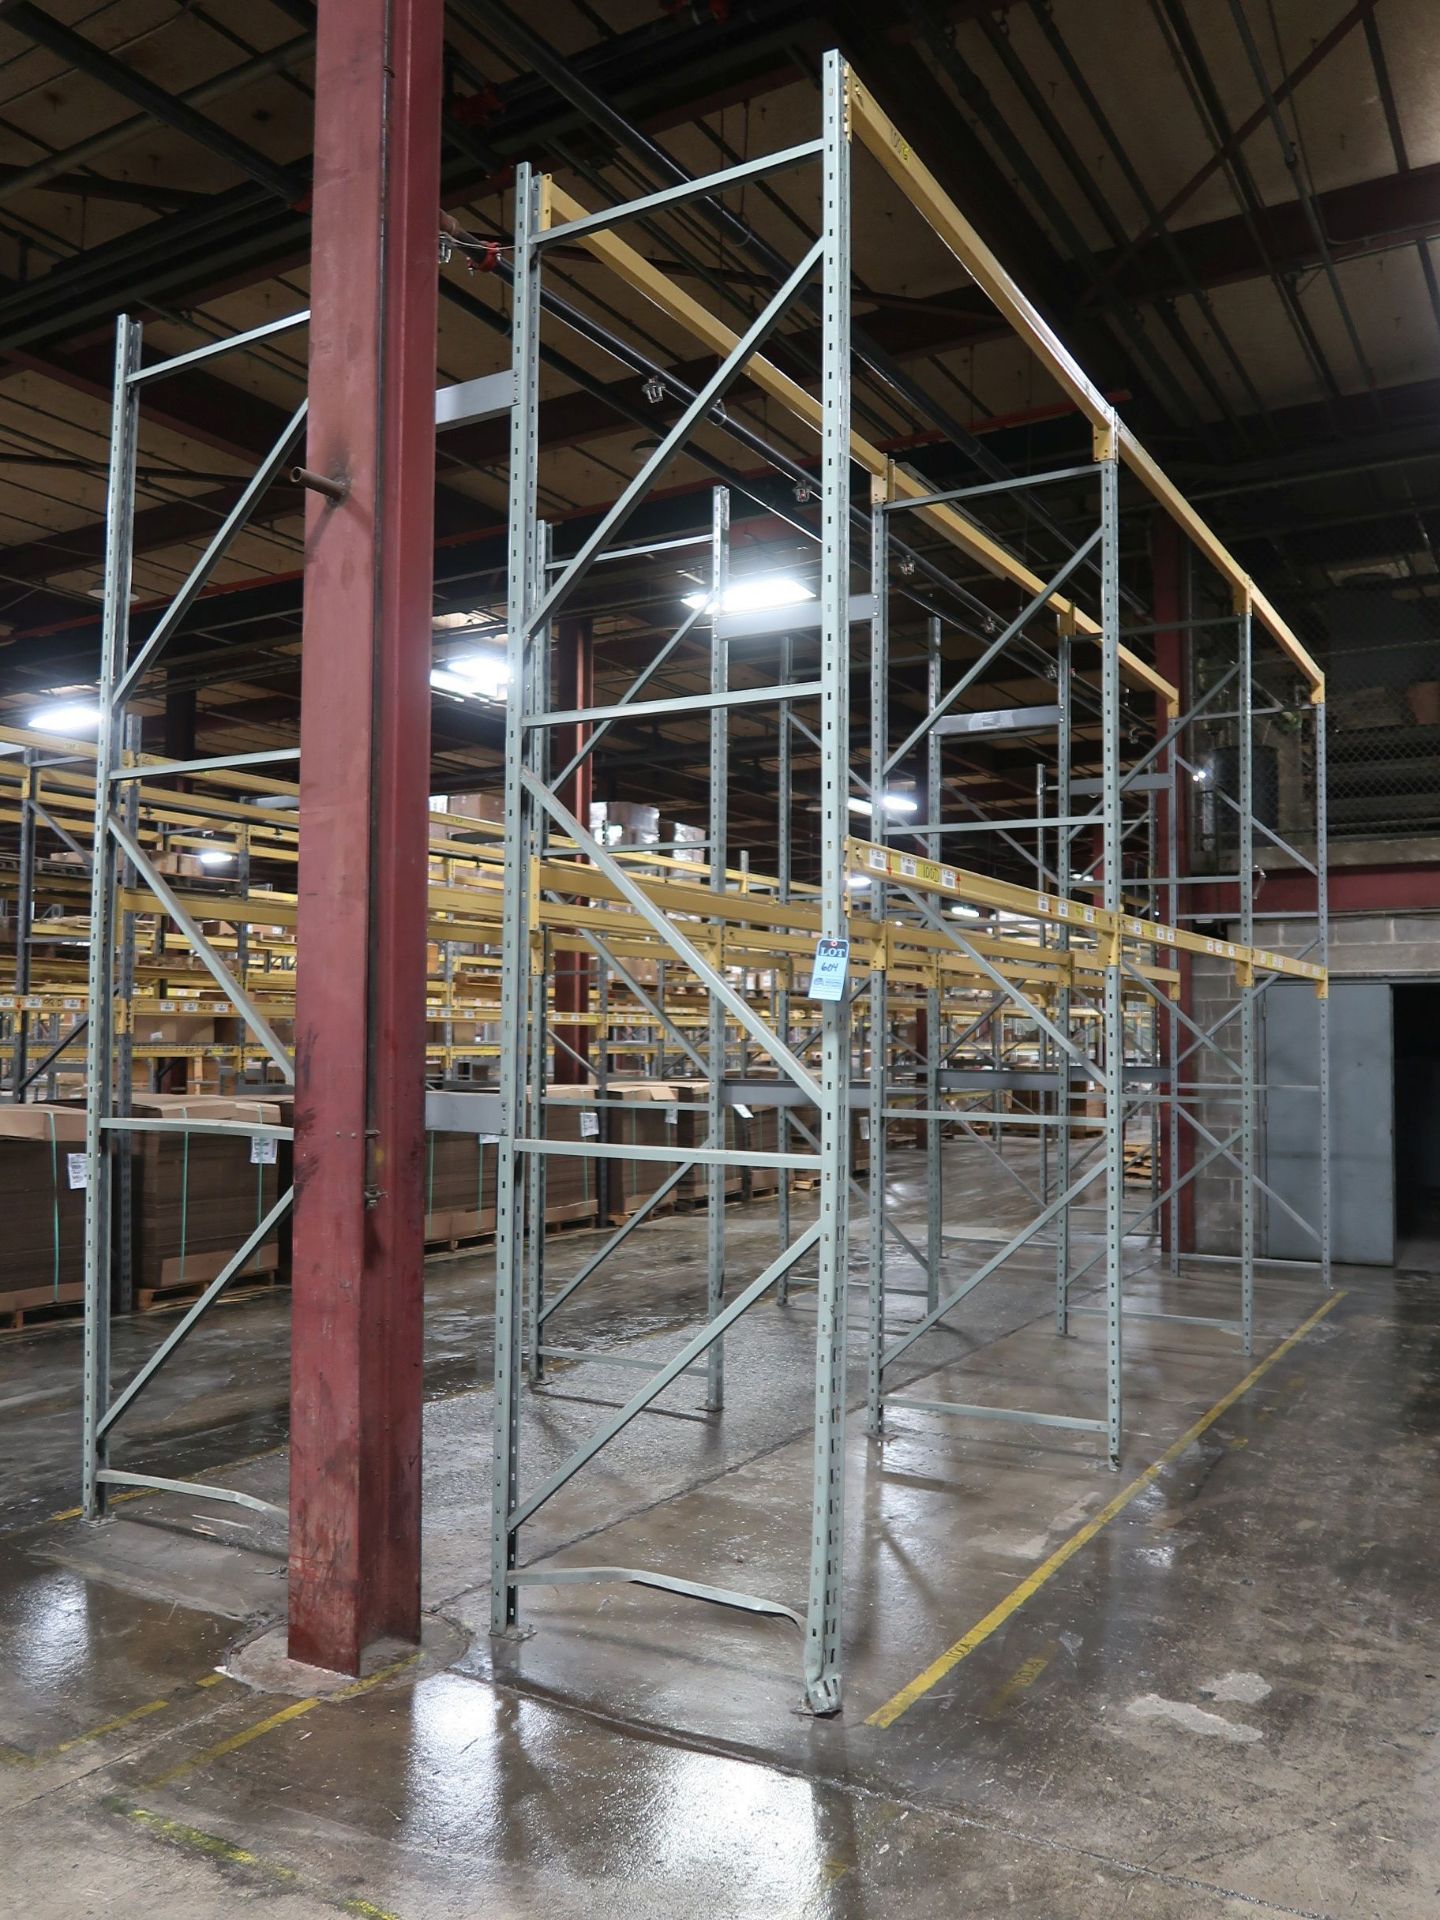 SECTIONS 96" X 42" X 168" ADJUSTABLE BEAM PALLET RACK; (16) 42" X 168" UPRIGHTS, (44) 96" X 3"